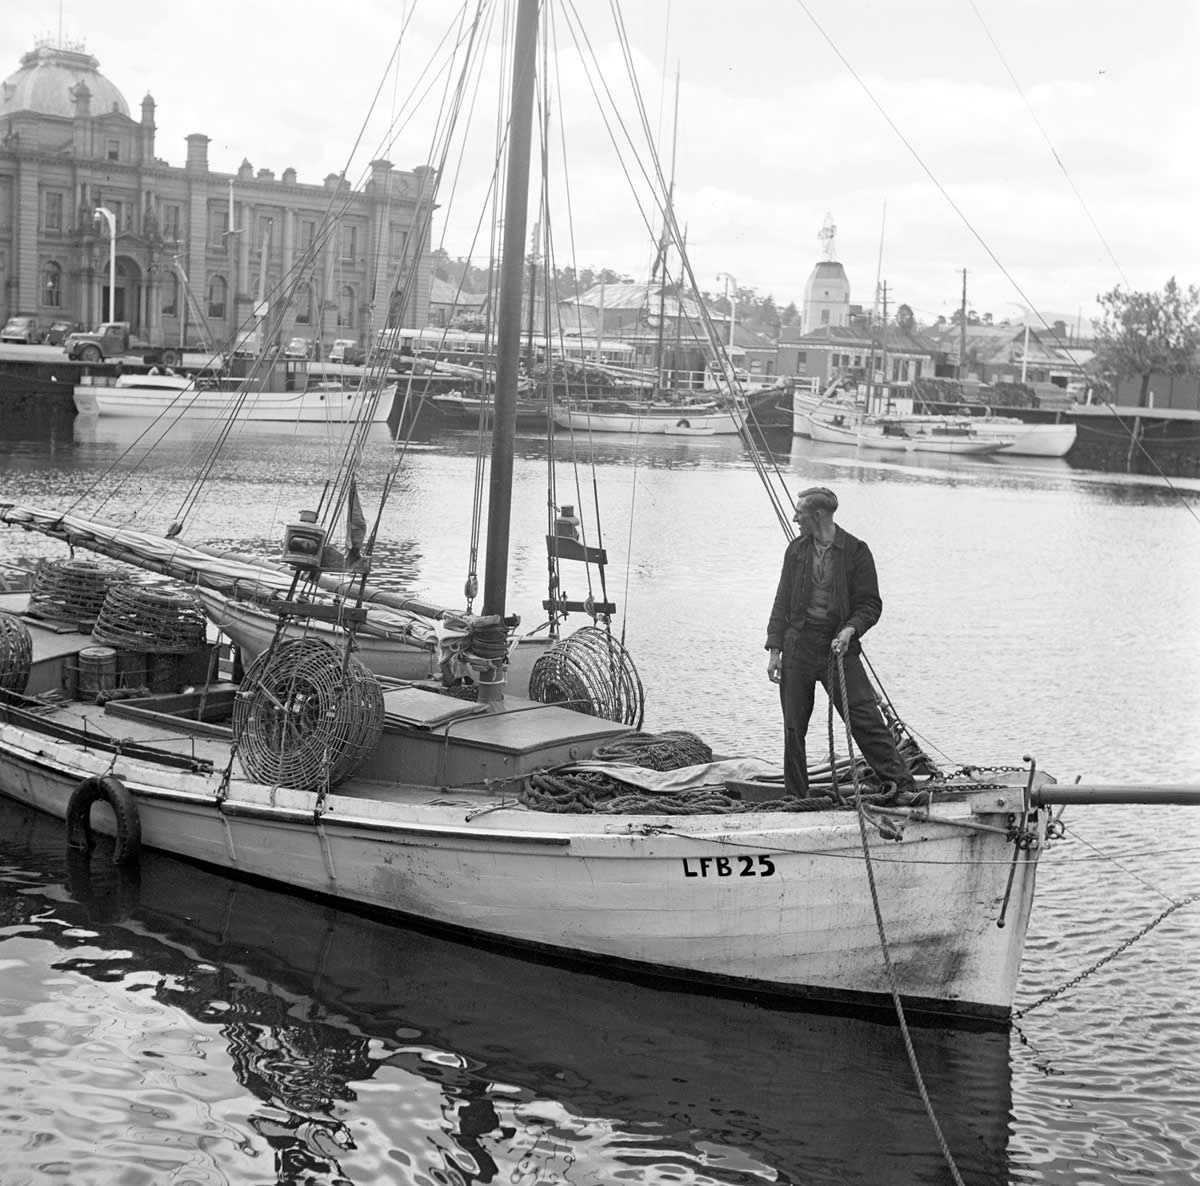 Fishing boat in Constitution Dock 1950s – Hobart wharves